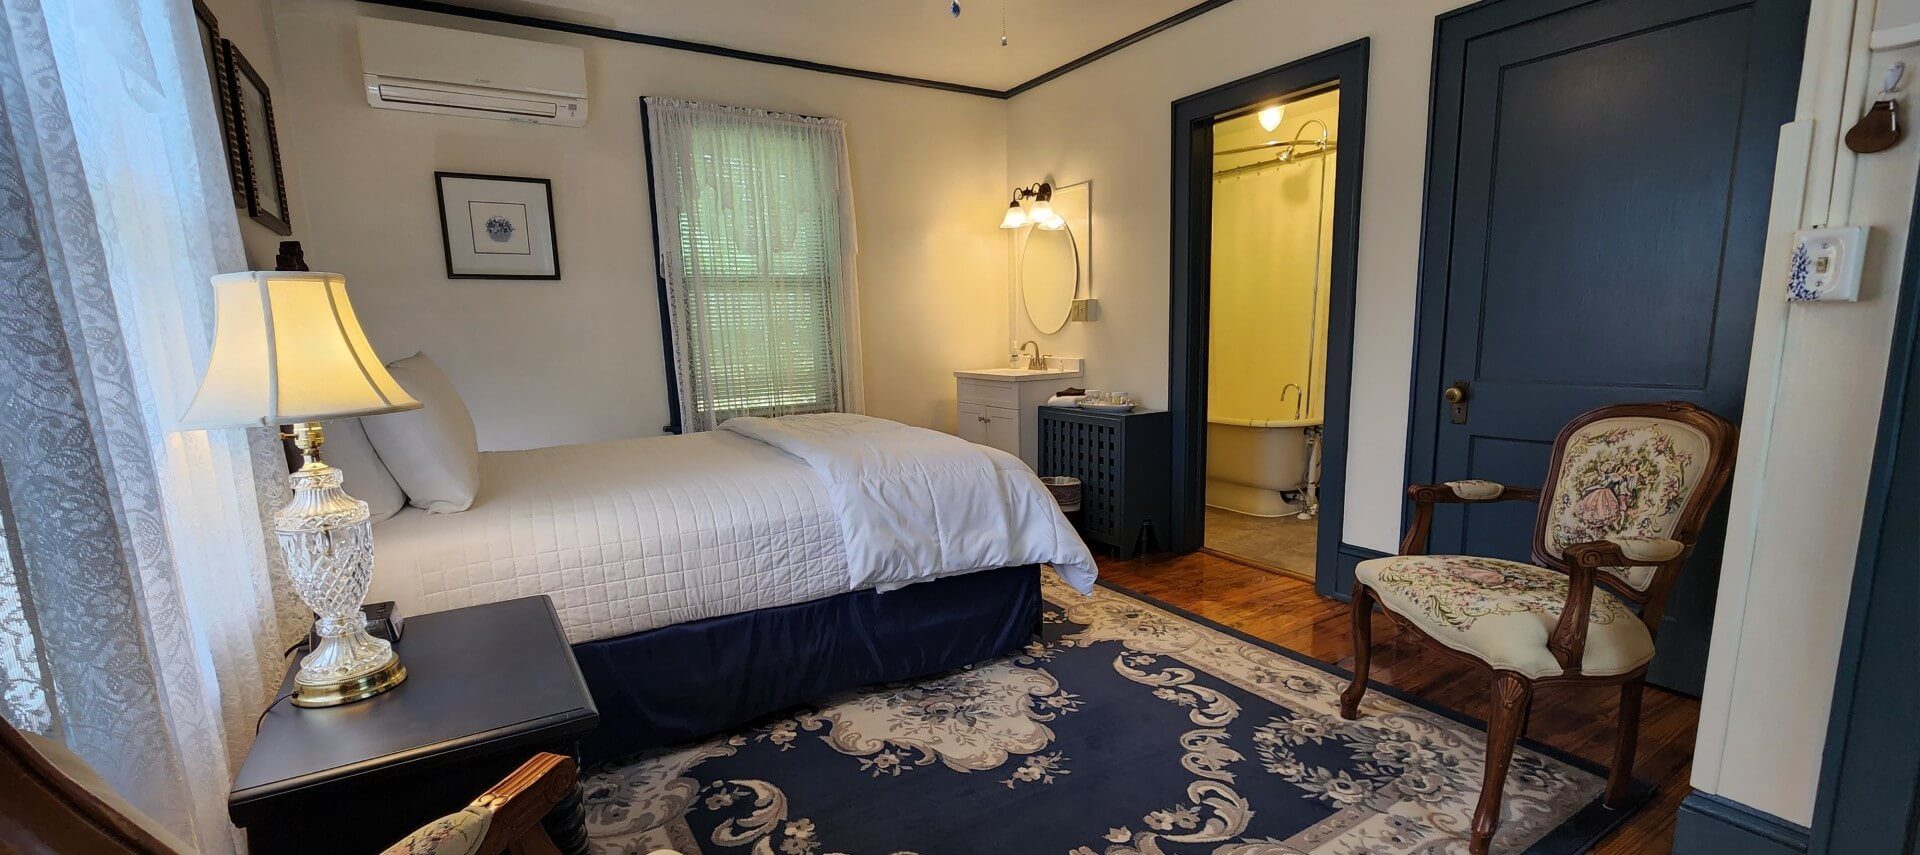 Guest room with bed in white linens, decorative blue rug and doorway into a bathroom with a clawfoot tub